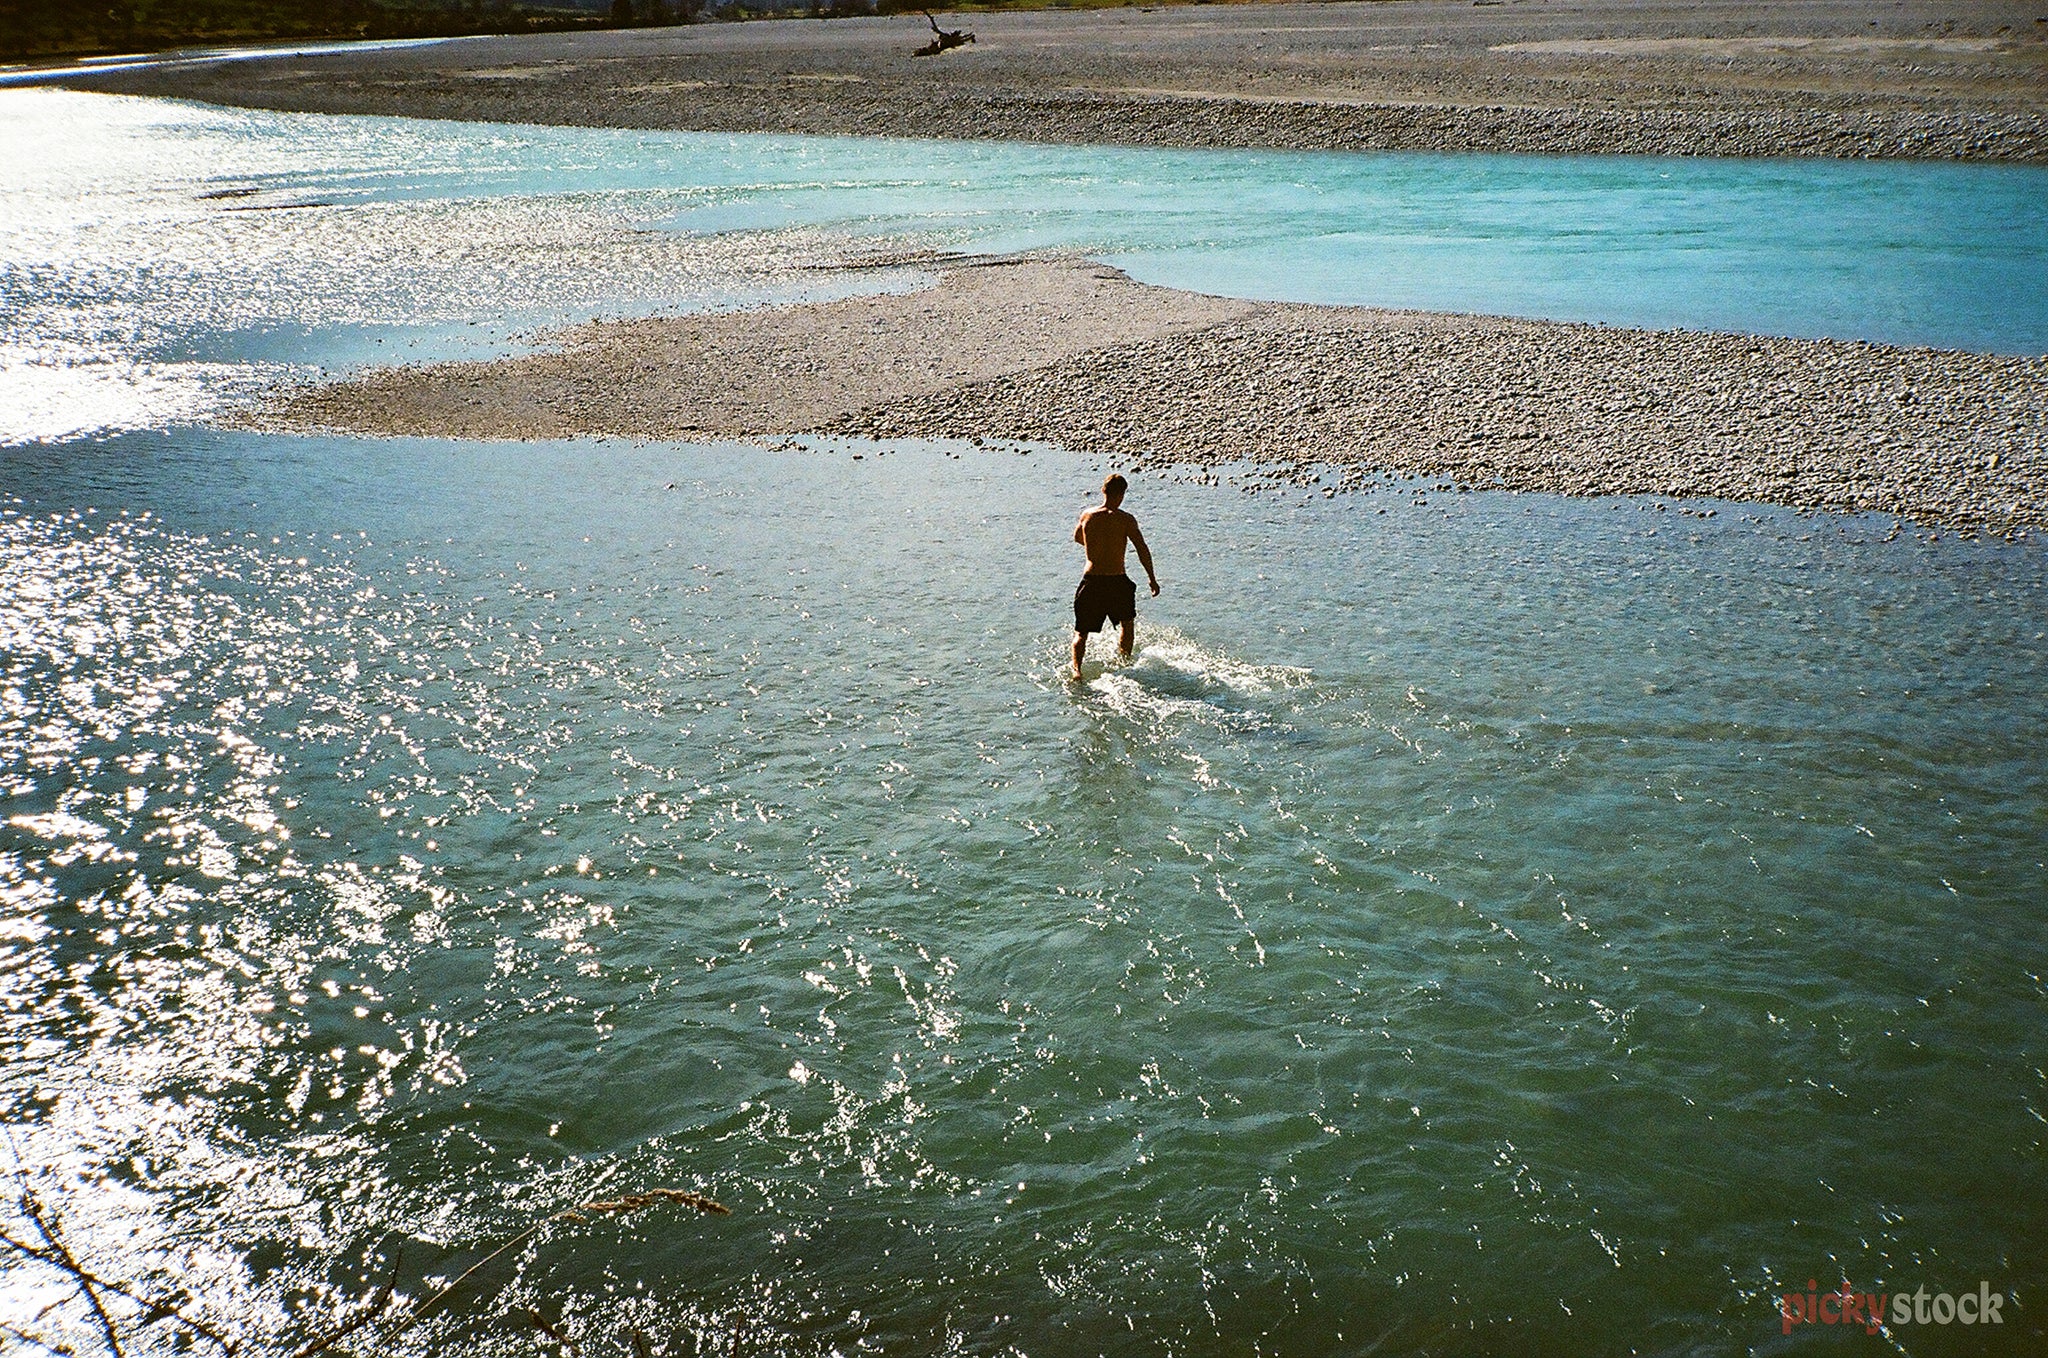 A man dashes out of the cool blue water while swimming in Glenorchy, Otago. The camera takes the photo from a high angle at a distance.